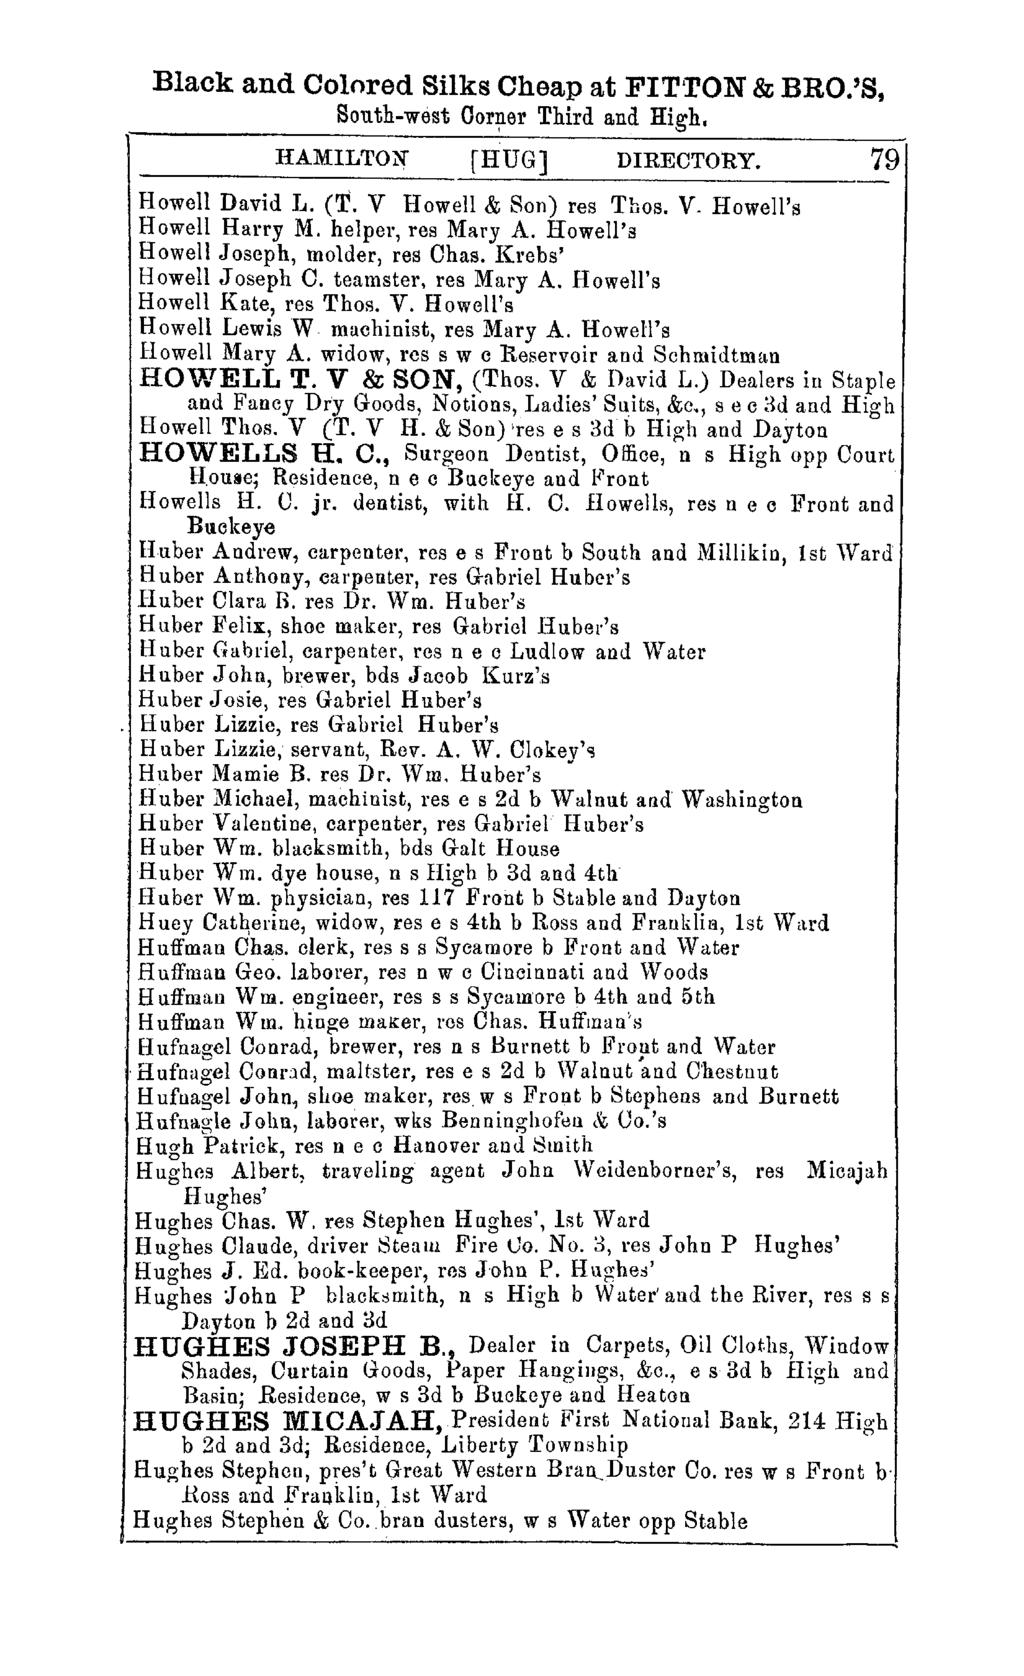 Black and Colored Silks Cheap at FITTON & BRO.'S, South-west OorJ?er Third and High. HAMILTO~ [HUG] DIRECTORY. 79 Howell David 1.1. CT. V Howell & Son) res Thos. V. Howell's Howell Harry M.